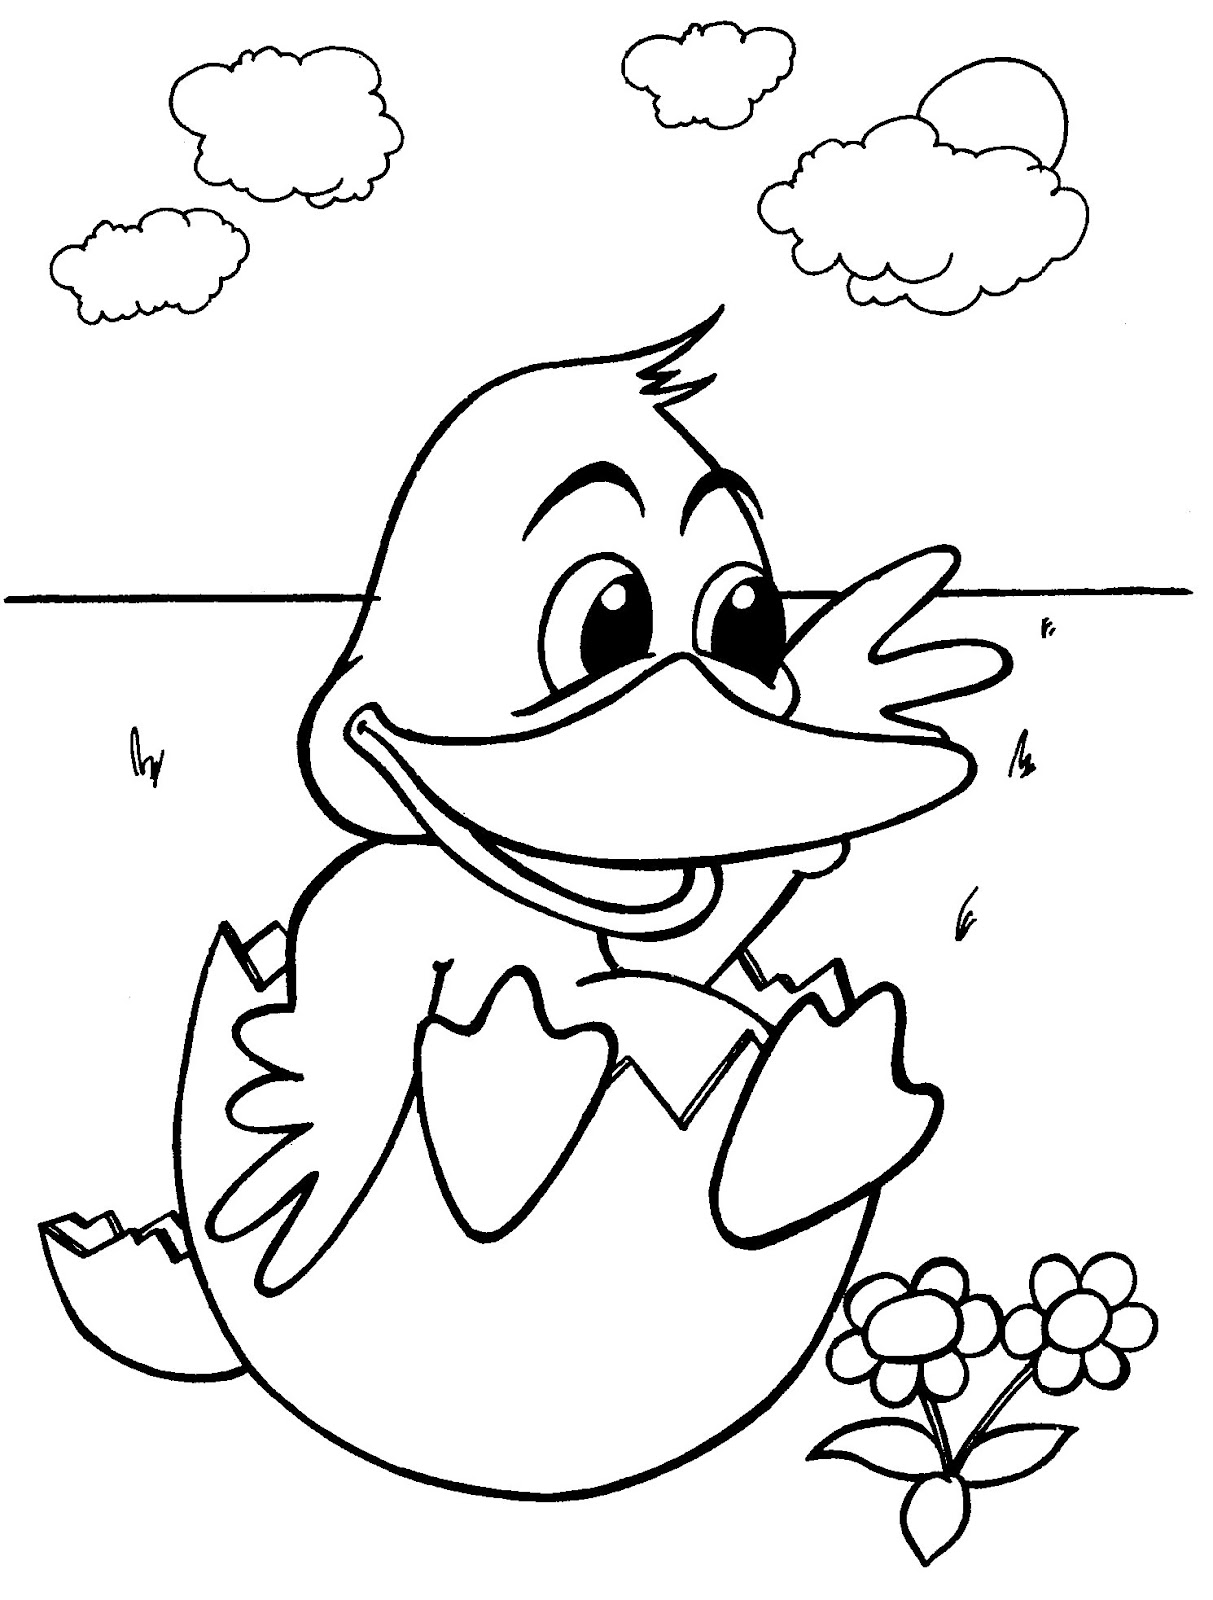 coloring book pictures of ducks baby ducks coloring pages pictures coloring book ducks pictures of 